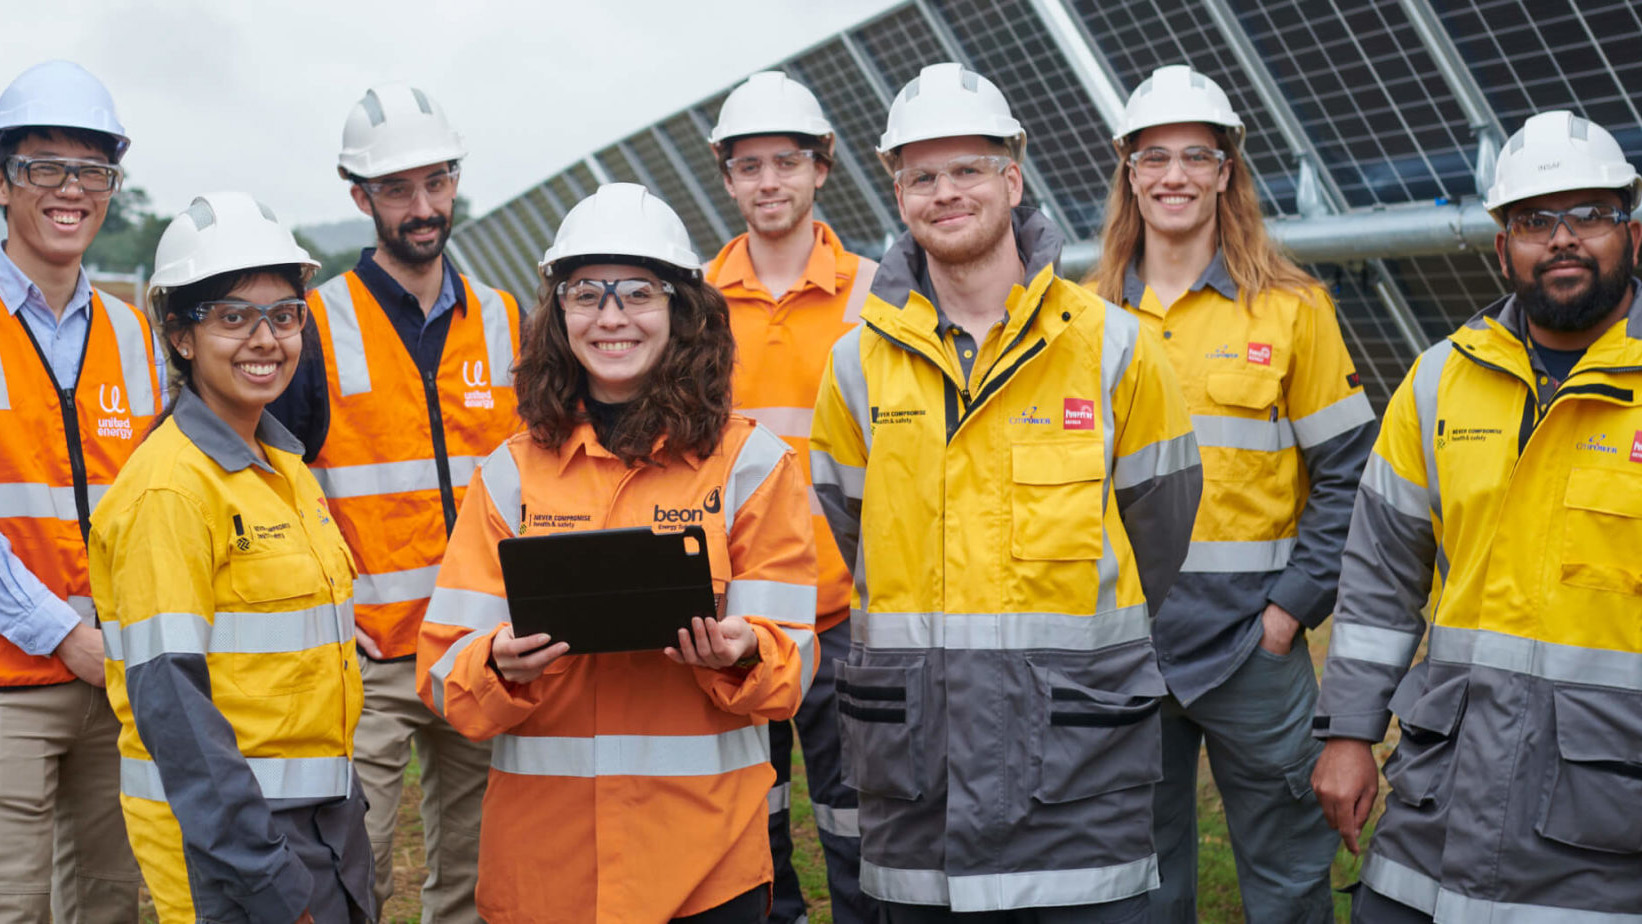 Graduates in hi-vis standing and smiling with solar panel in the background